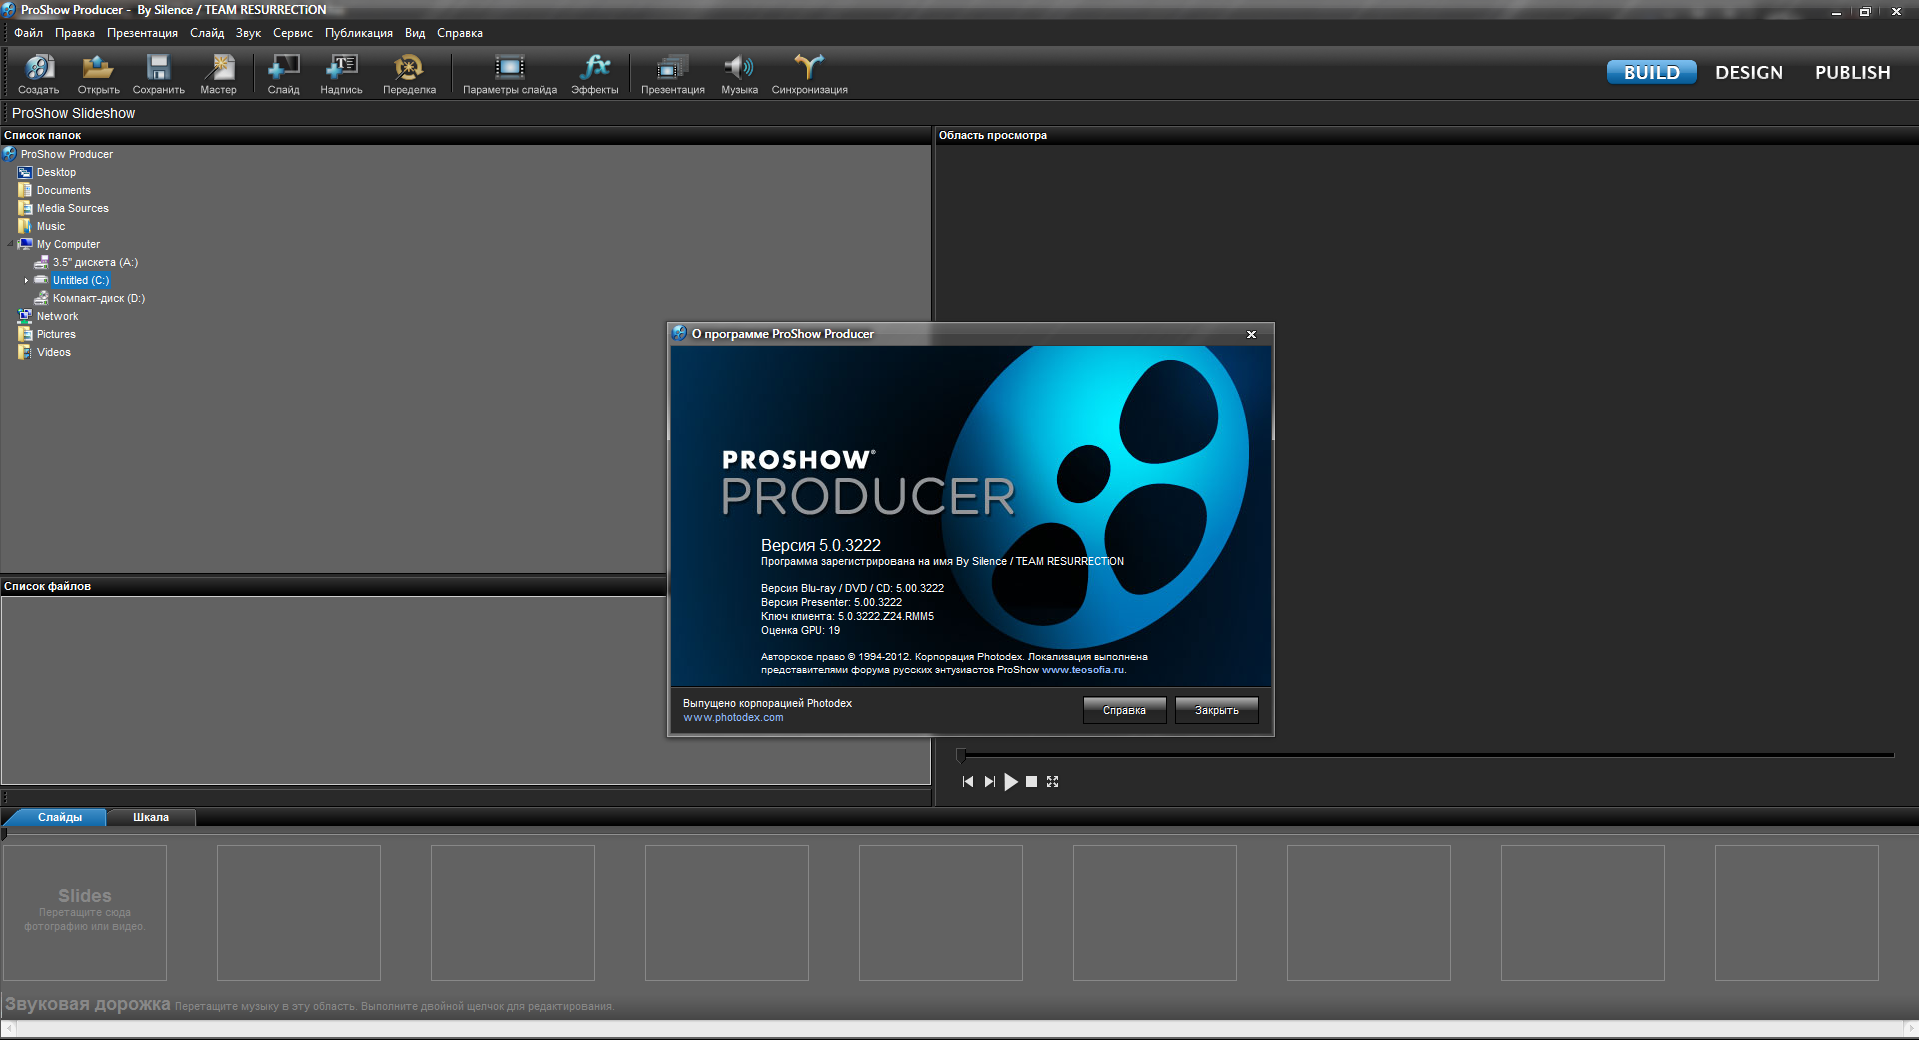 Photodex proshow producer v5.0.3296 with key h33tiahq76